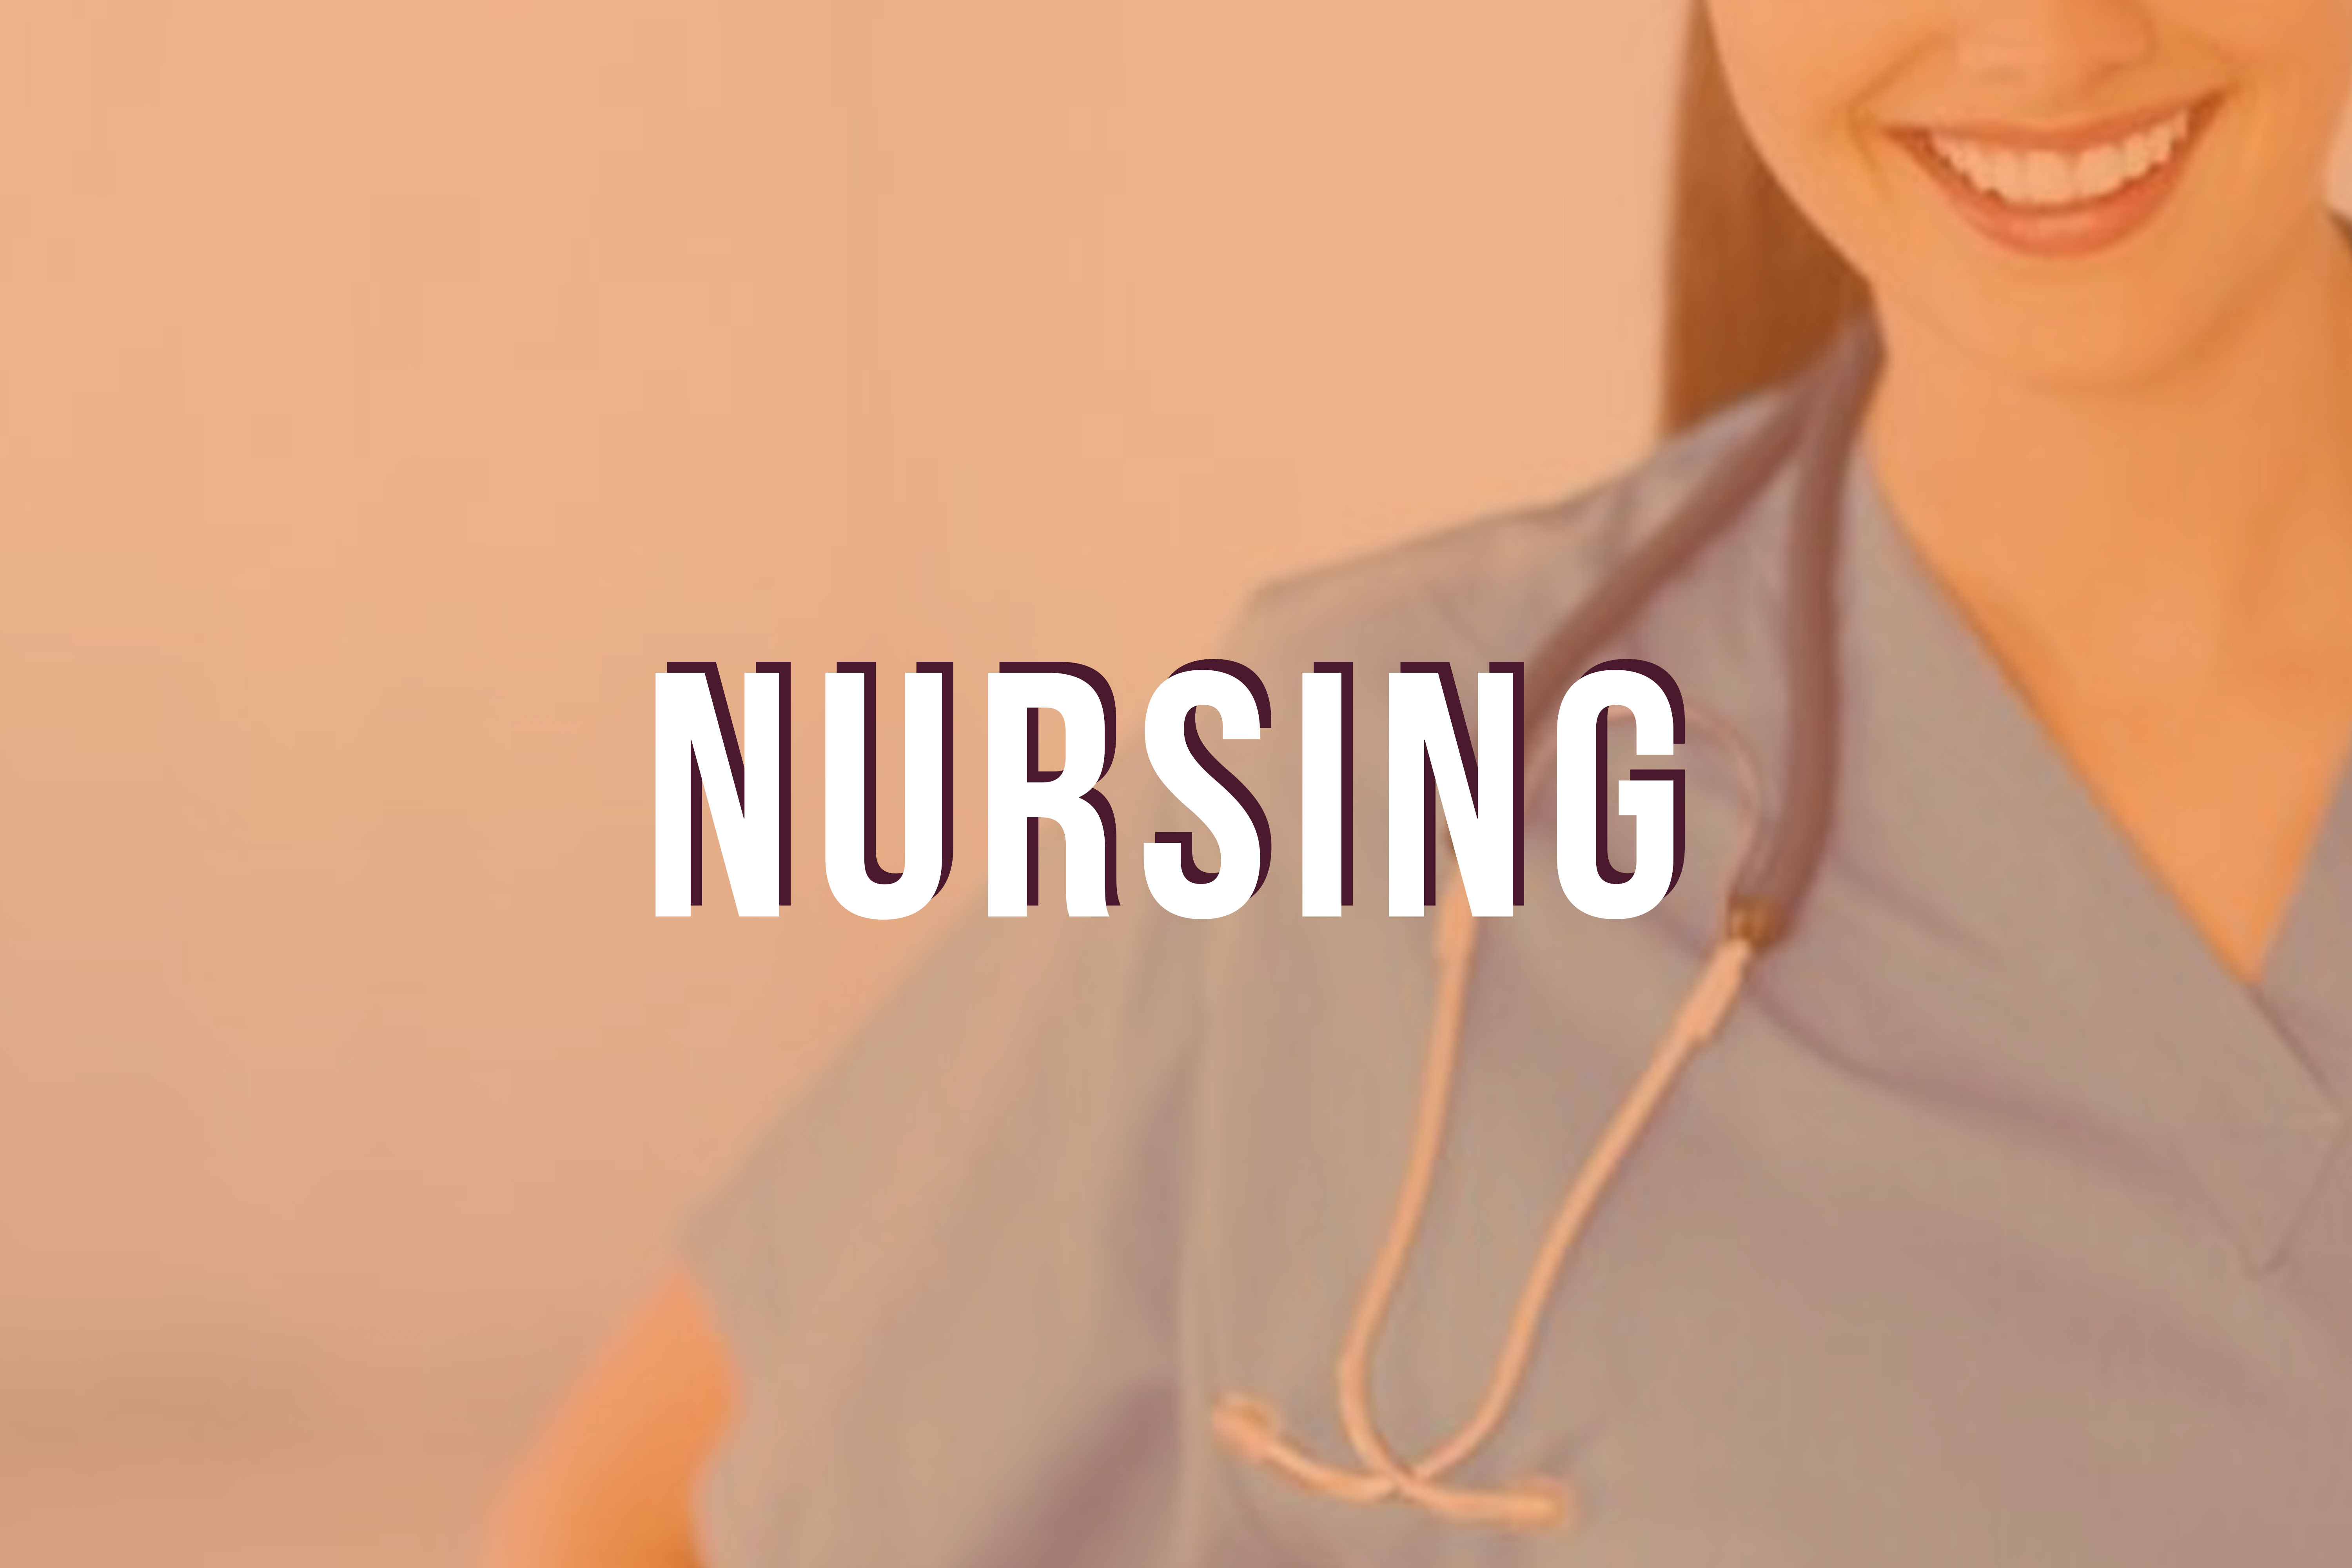 Nursing: Shaped by Women, Paid with a Gap